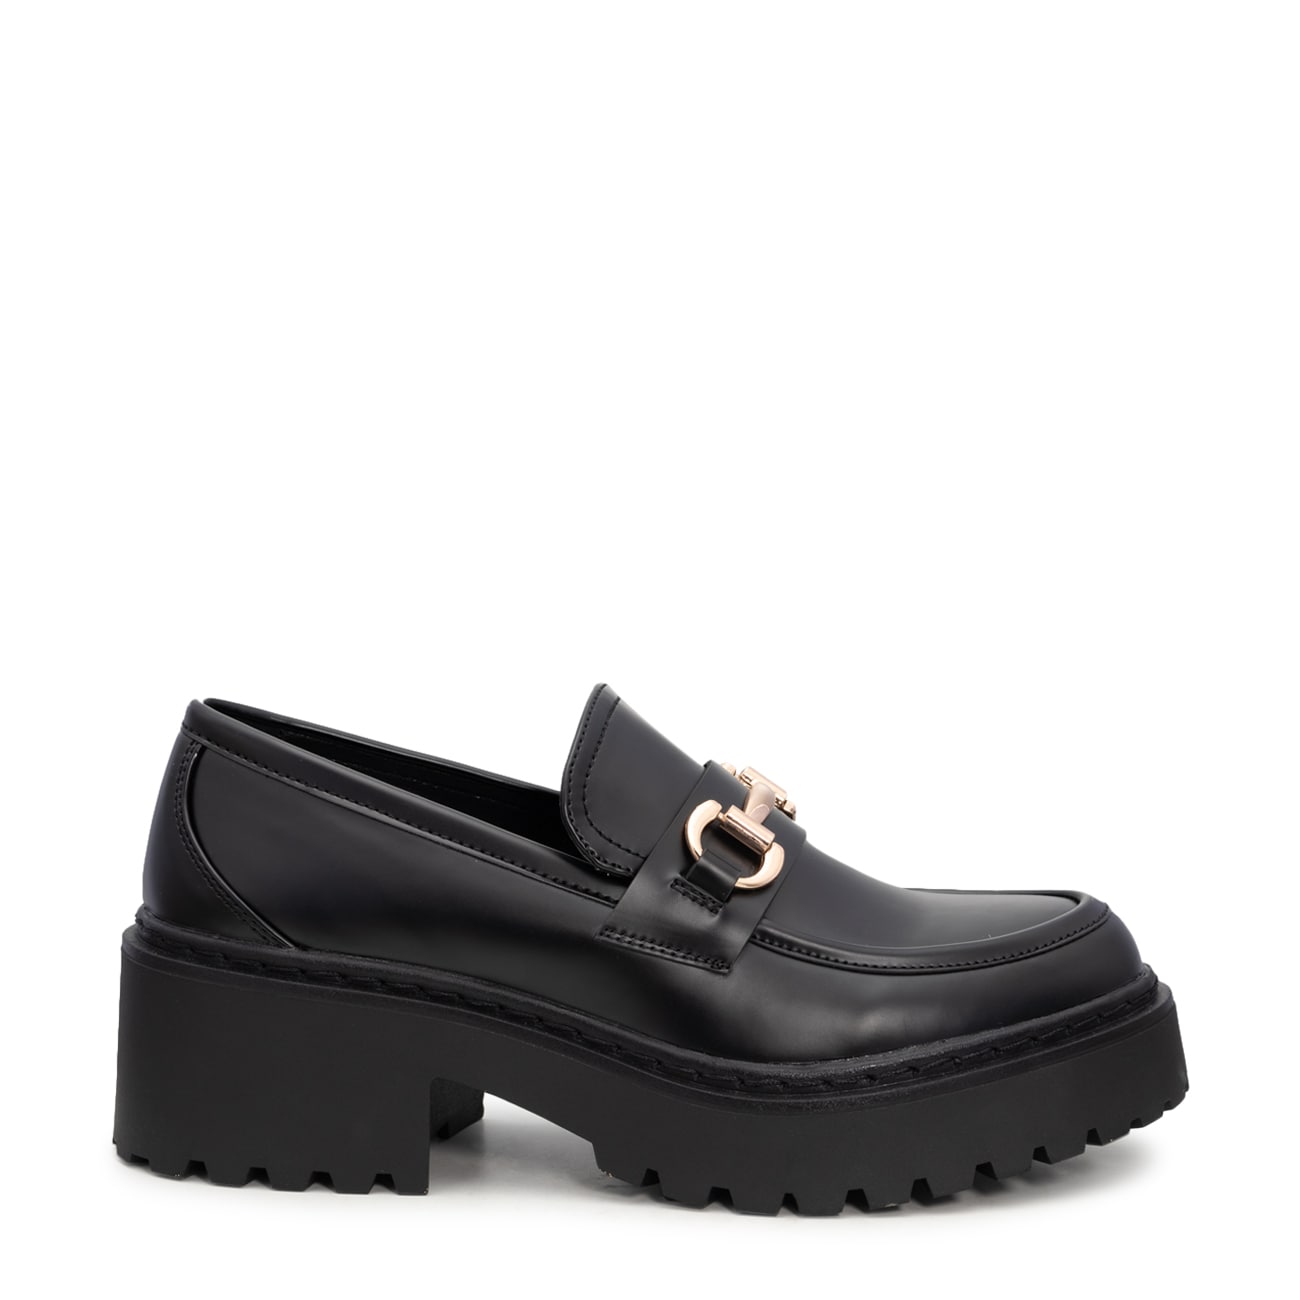 RIDLEY Black Leather Loafers | Women's Designer Shoes – Steve Madden Canada